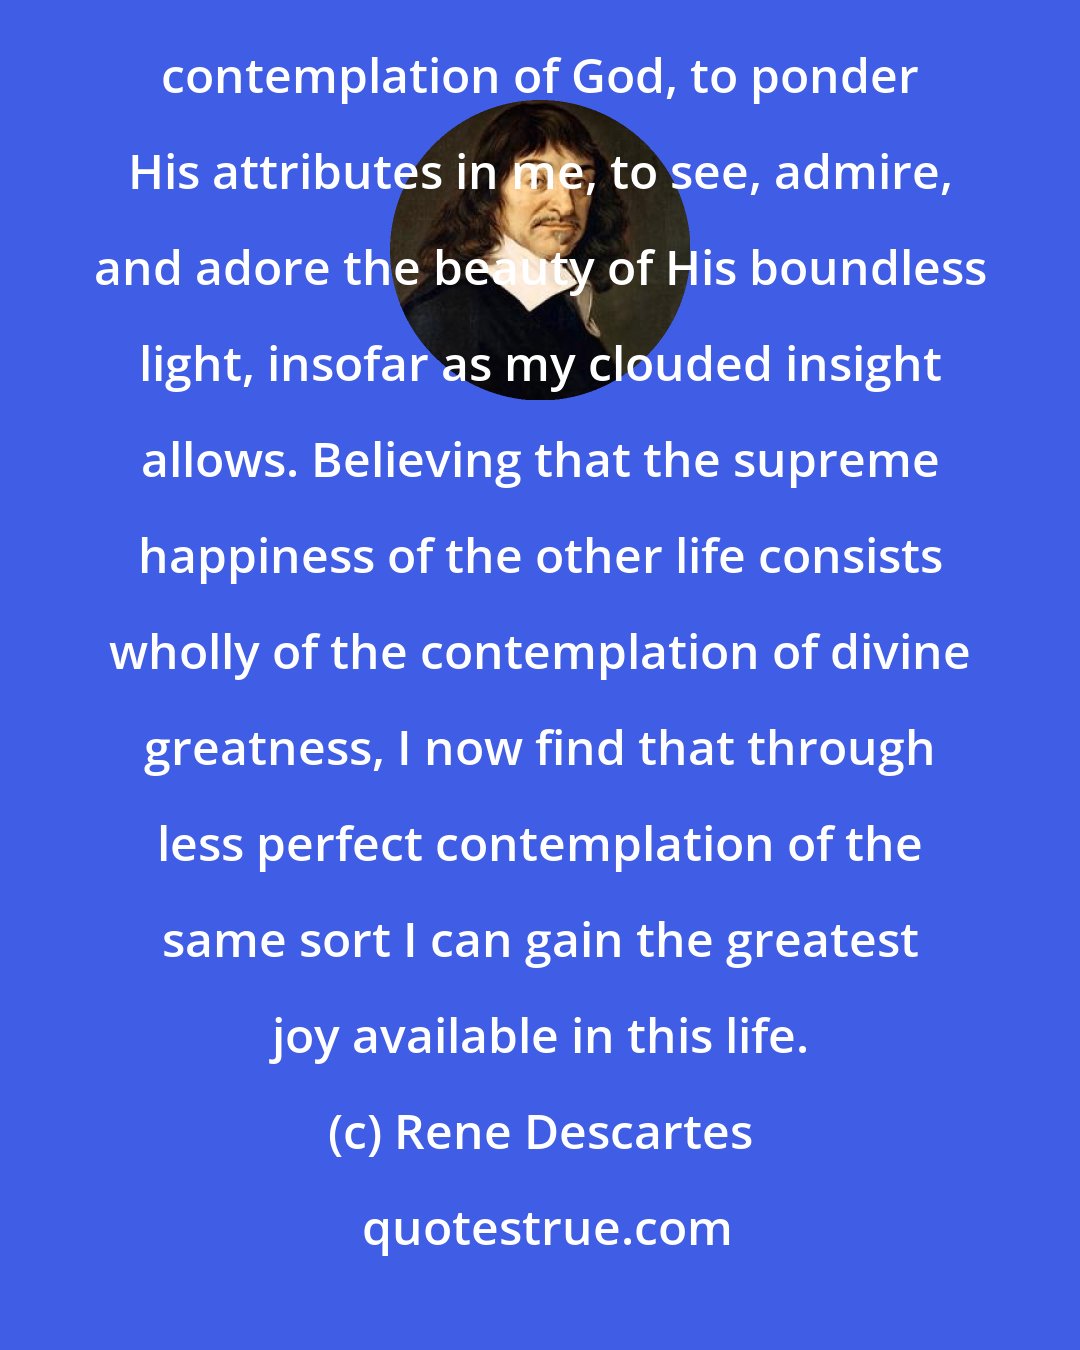 Rene Descartes: Before examining this more carefully and investigating its consequences, I want to dwell for a moment in the contemplation of God, to ponder His attributes in me, to see, admire, and adore the beauty of His boundless light, insofar as my clouded insight allows. Believing that the supreme happiness of the other life consists wholly of the contemplation of divine greatness, I now find that through less perfect contemplation of the same sort I can gain the greatest joy available in this life.